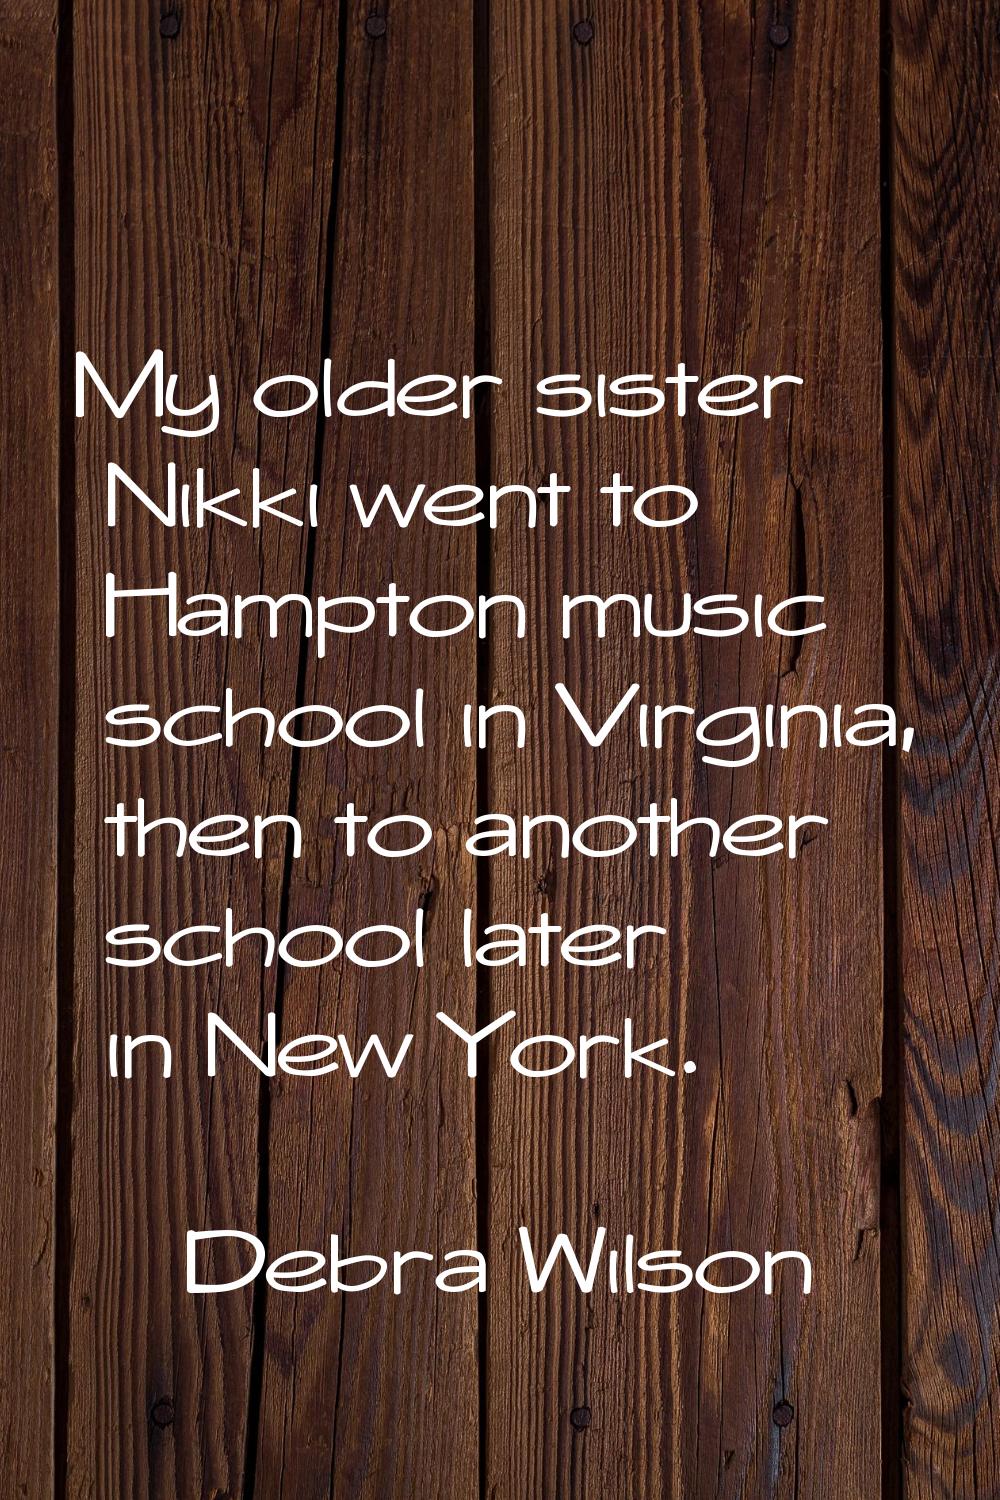 My older sister Nikki went to Hampton music school in Virginia, then to another school later in New